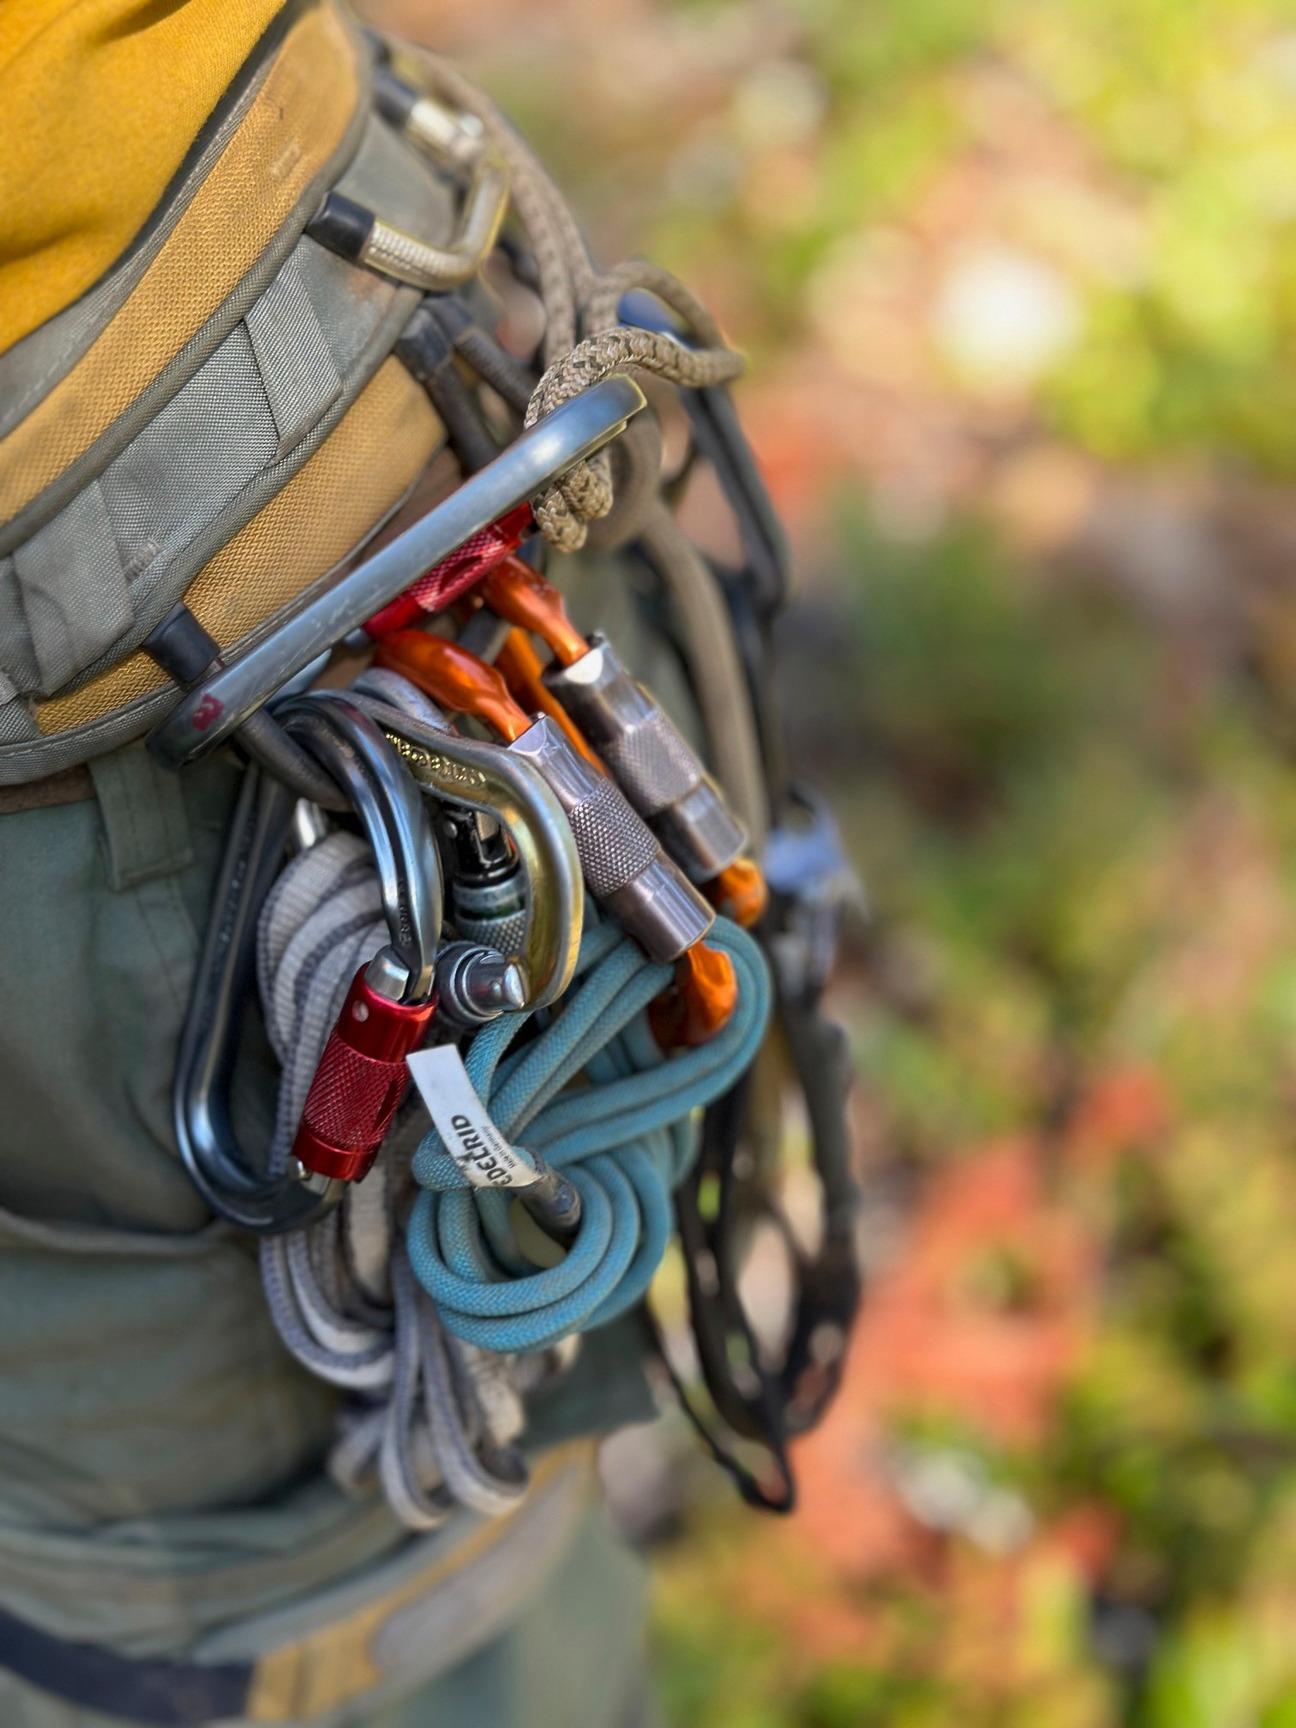 Rigging equipment- carabiners are shown here